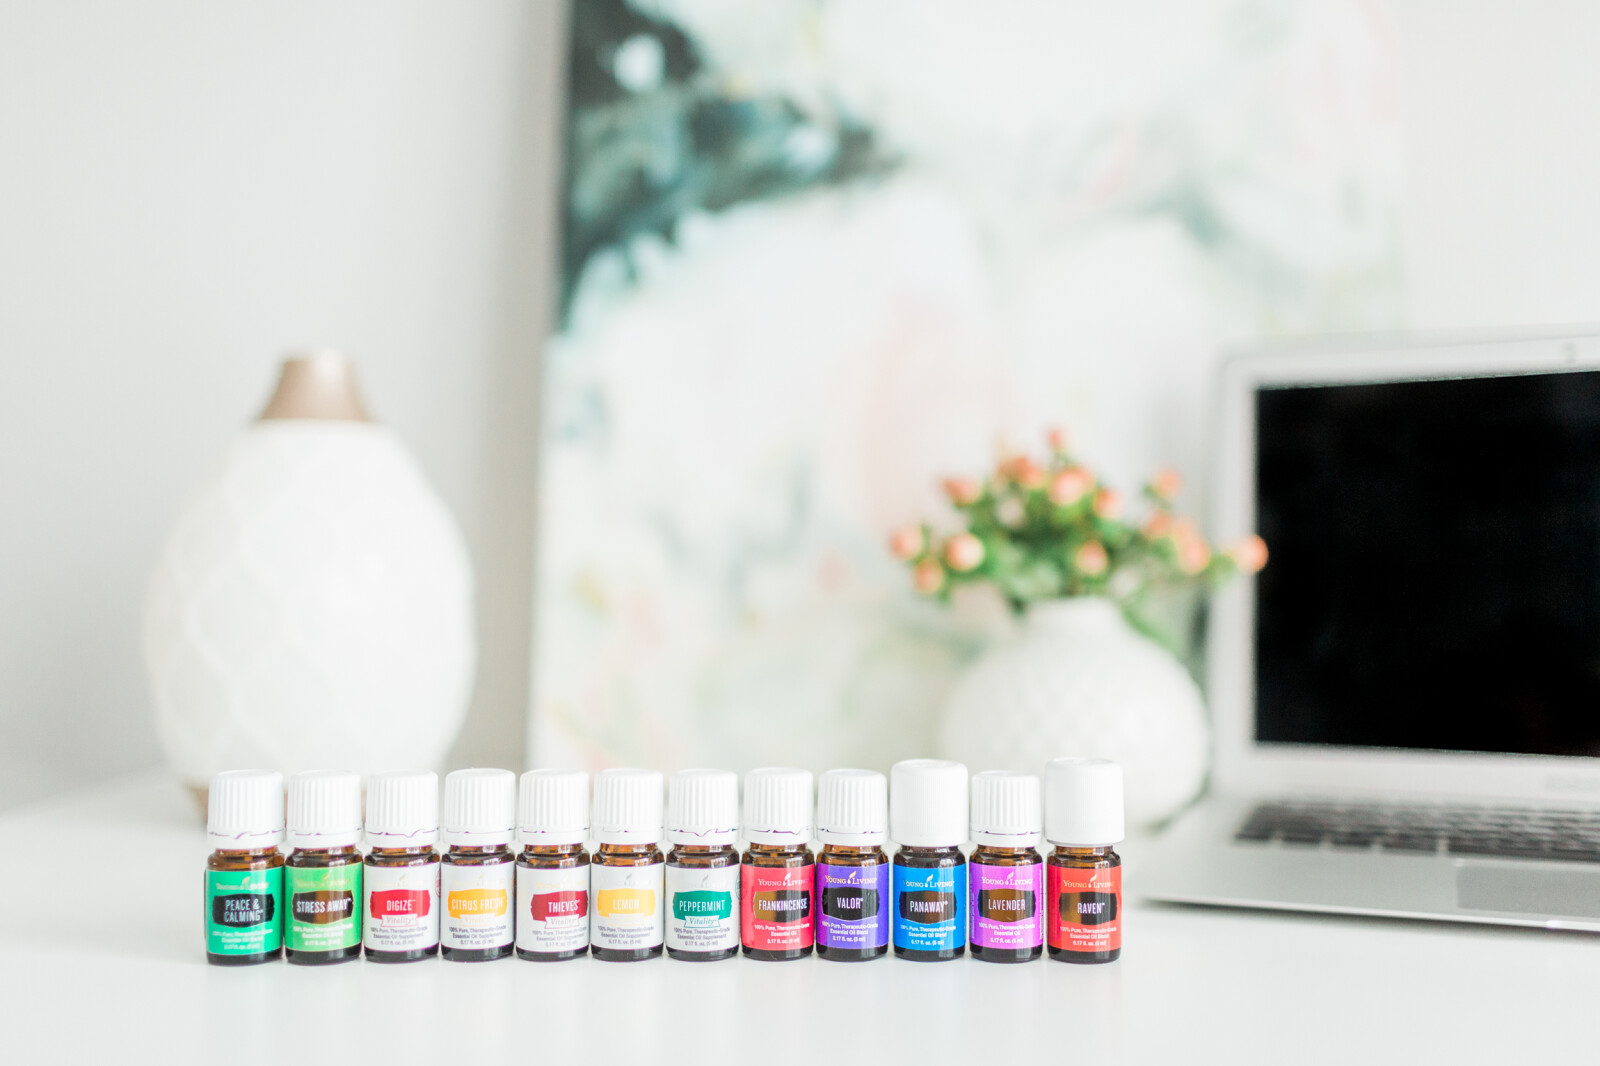 HOW TO GET STARTED WITH ESSENTIAL OILS THE RIGHT WAY